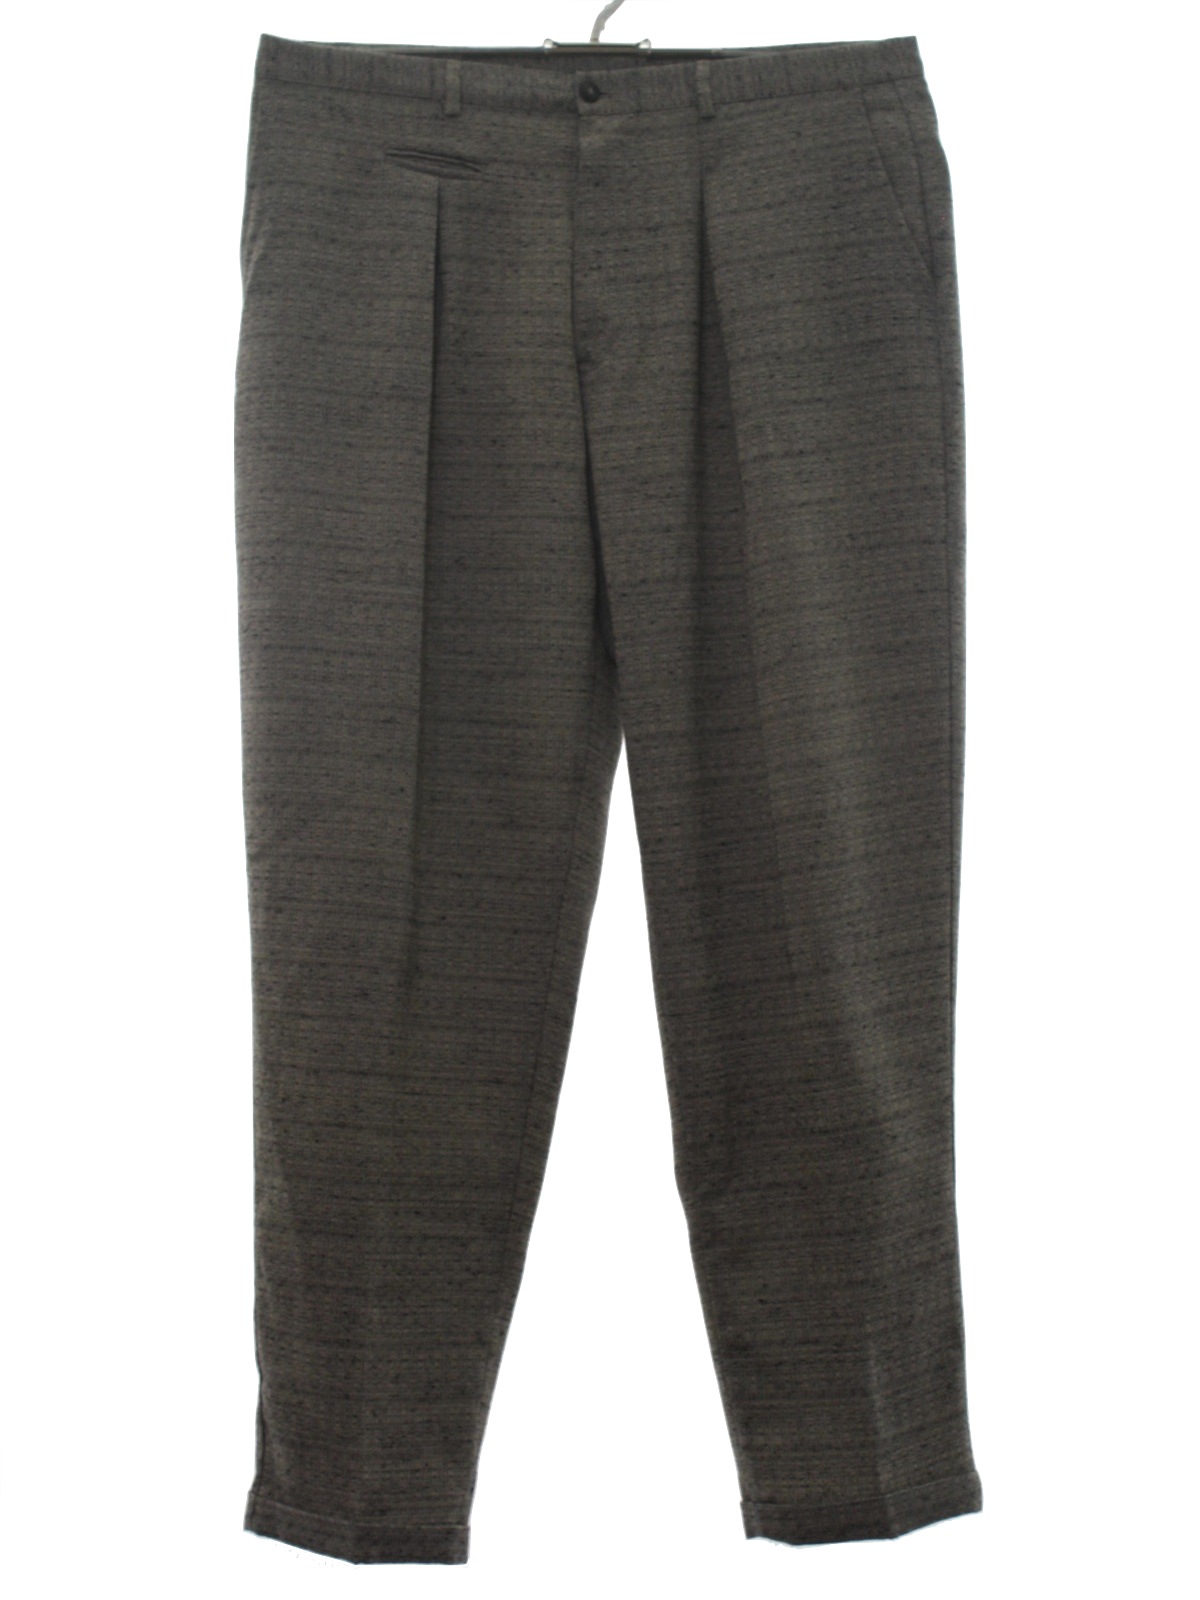 RPM 80's Vintage Pants: 80s -RPM- Mens black and grey pulled weave ...